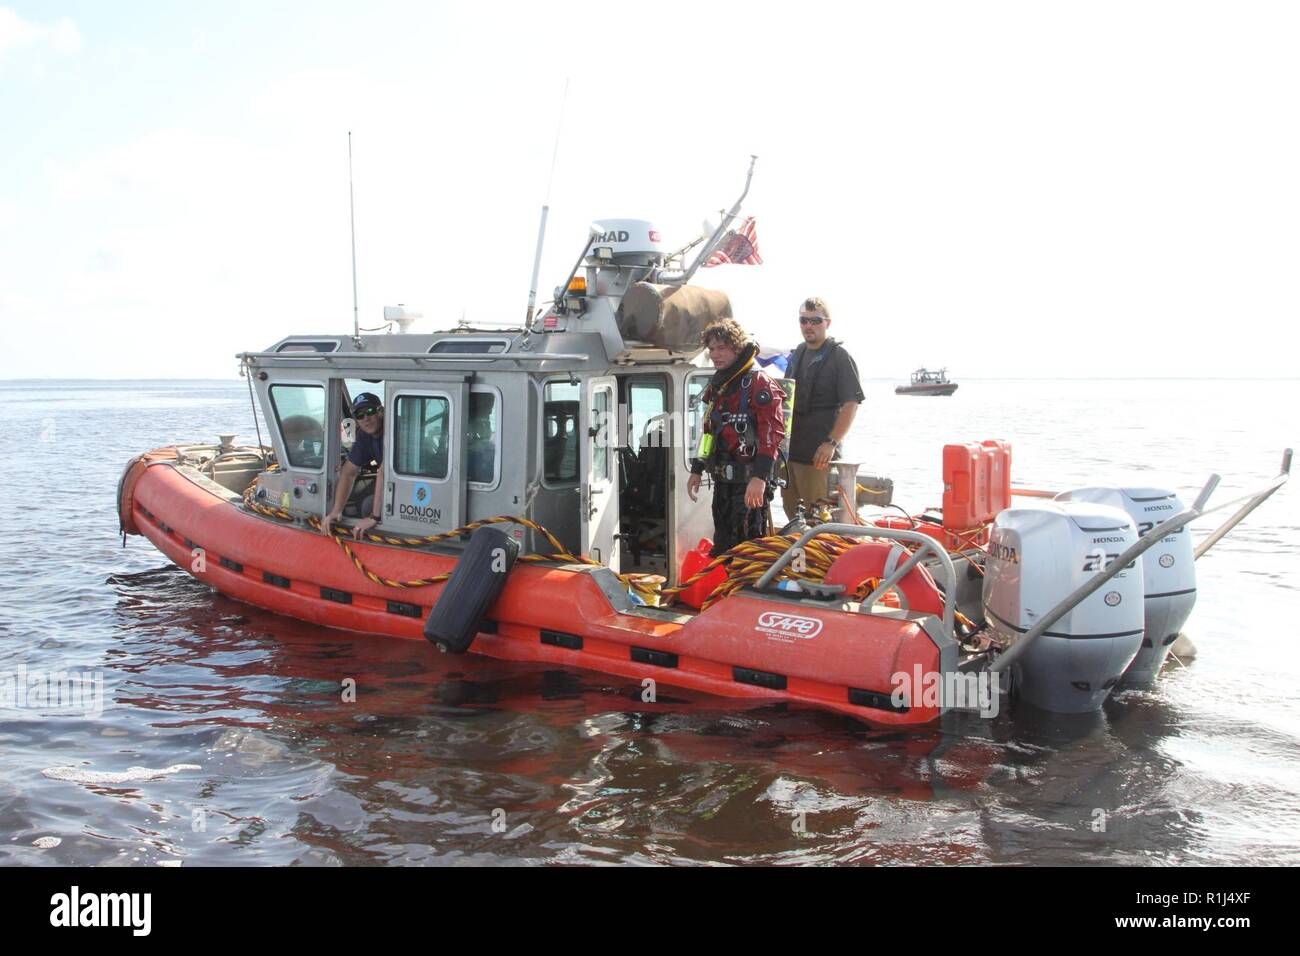 Hurricane Florence made landfall on Sept. 14, 2018 and the U.S. Army Corps of Engineers Wilmington District began assessments of impacted federal ports in NC, Sept. 17, 2018. As part of its assessment, divers from Donjon Marine Company deployed to the area of the Snows Marsh Channel with the Octopus survey system collecting images in the Cape Fear River and identified several large obstructions that were previous detected by Corps survey crews, as large rocks. USACE and Donjon Marine continues with multi-beam and side scan surveying of other identified targets for possible identification and a Stock Photo